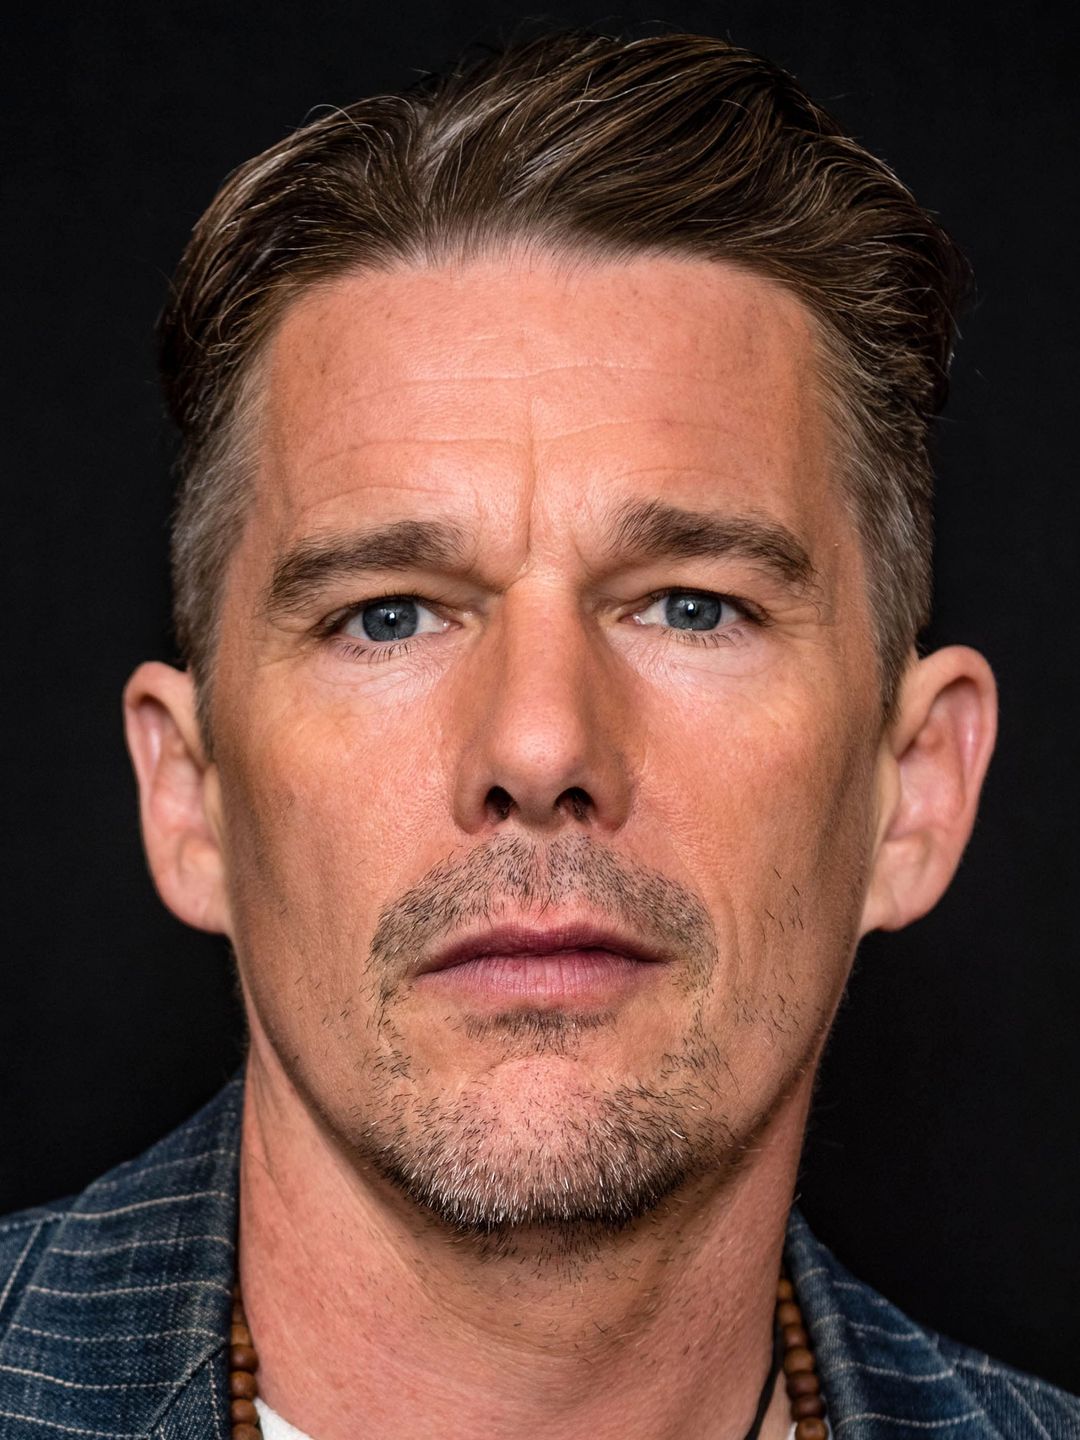 Ethan Hawke young photos